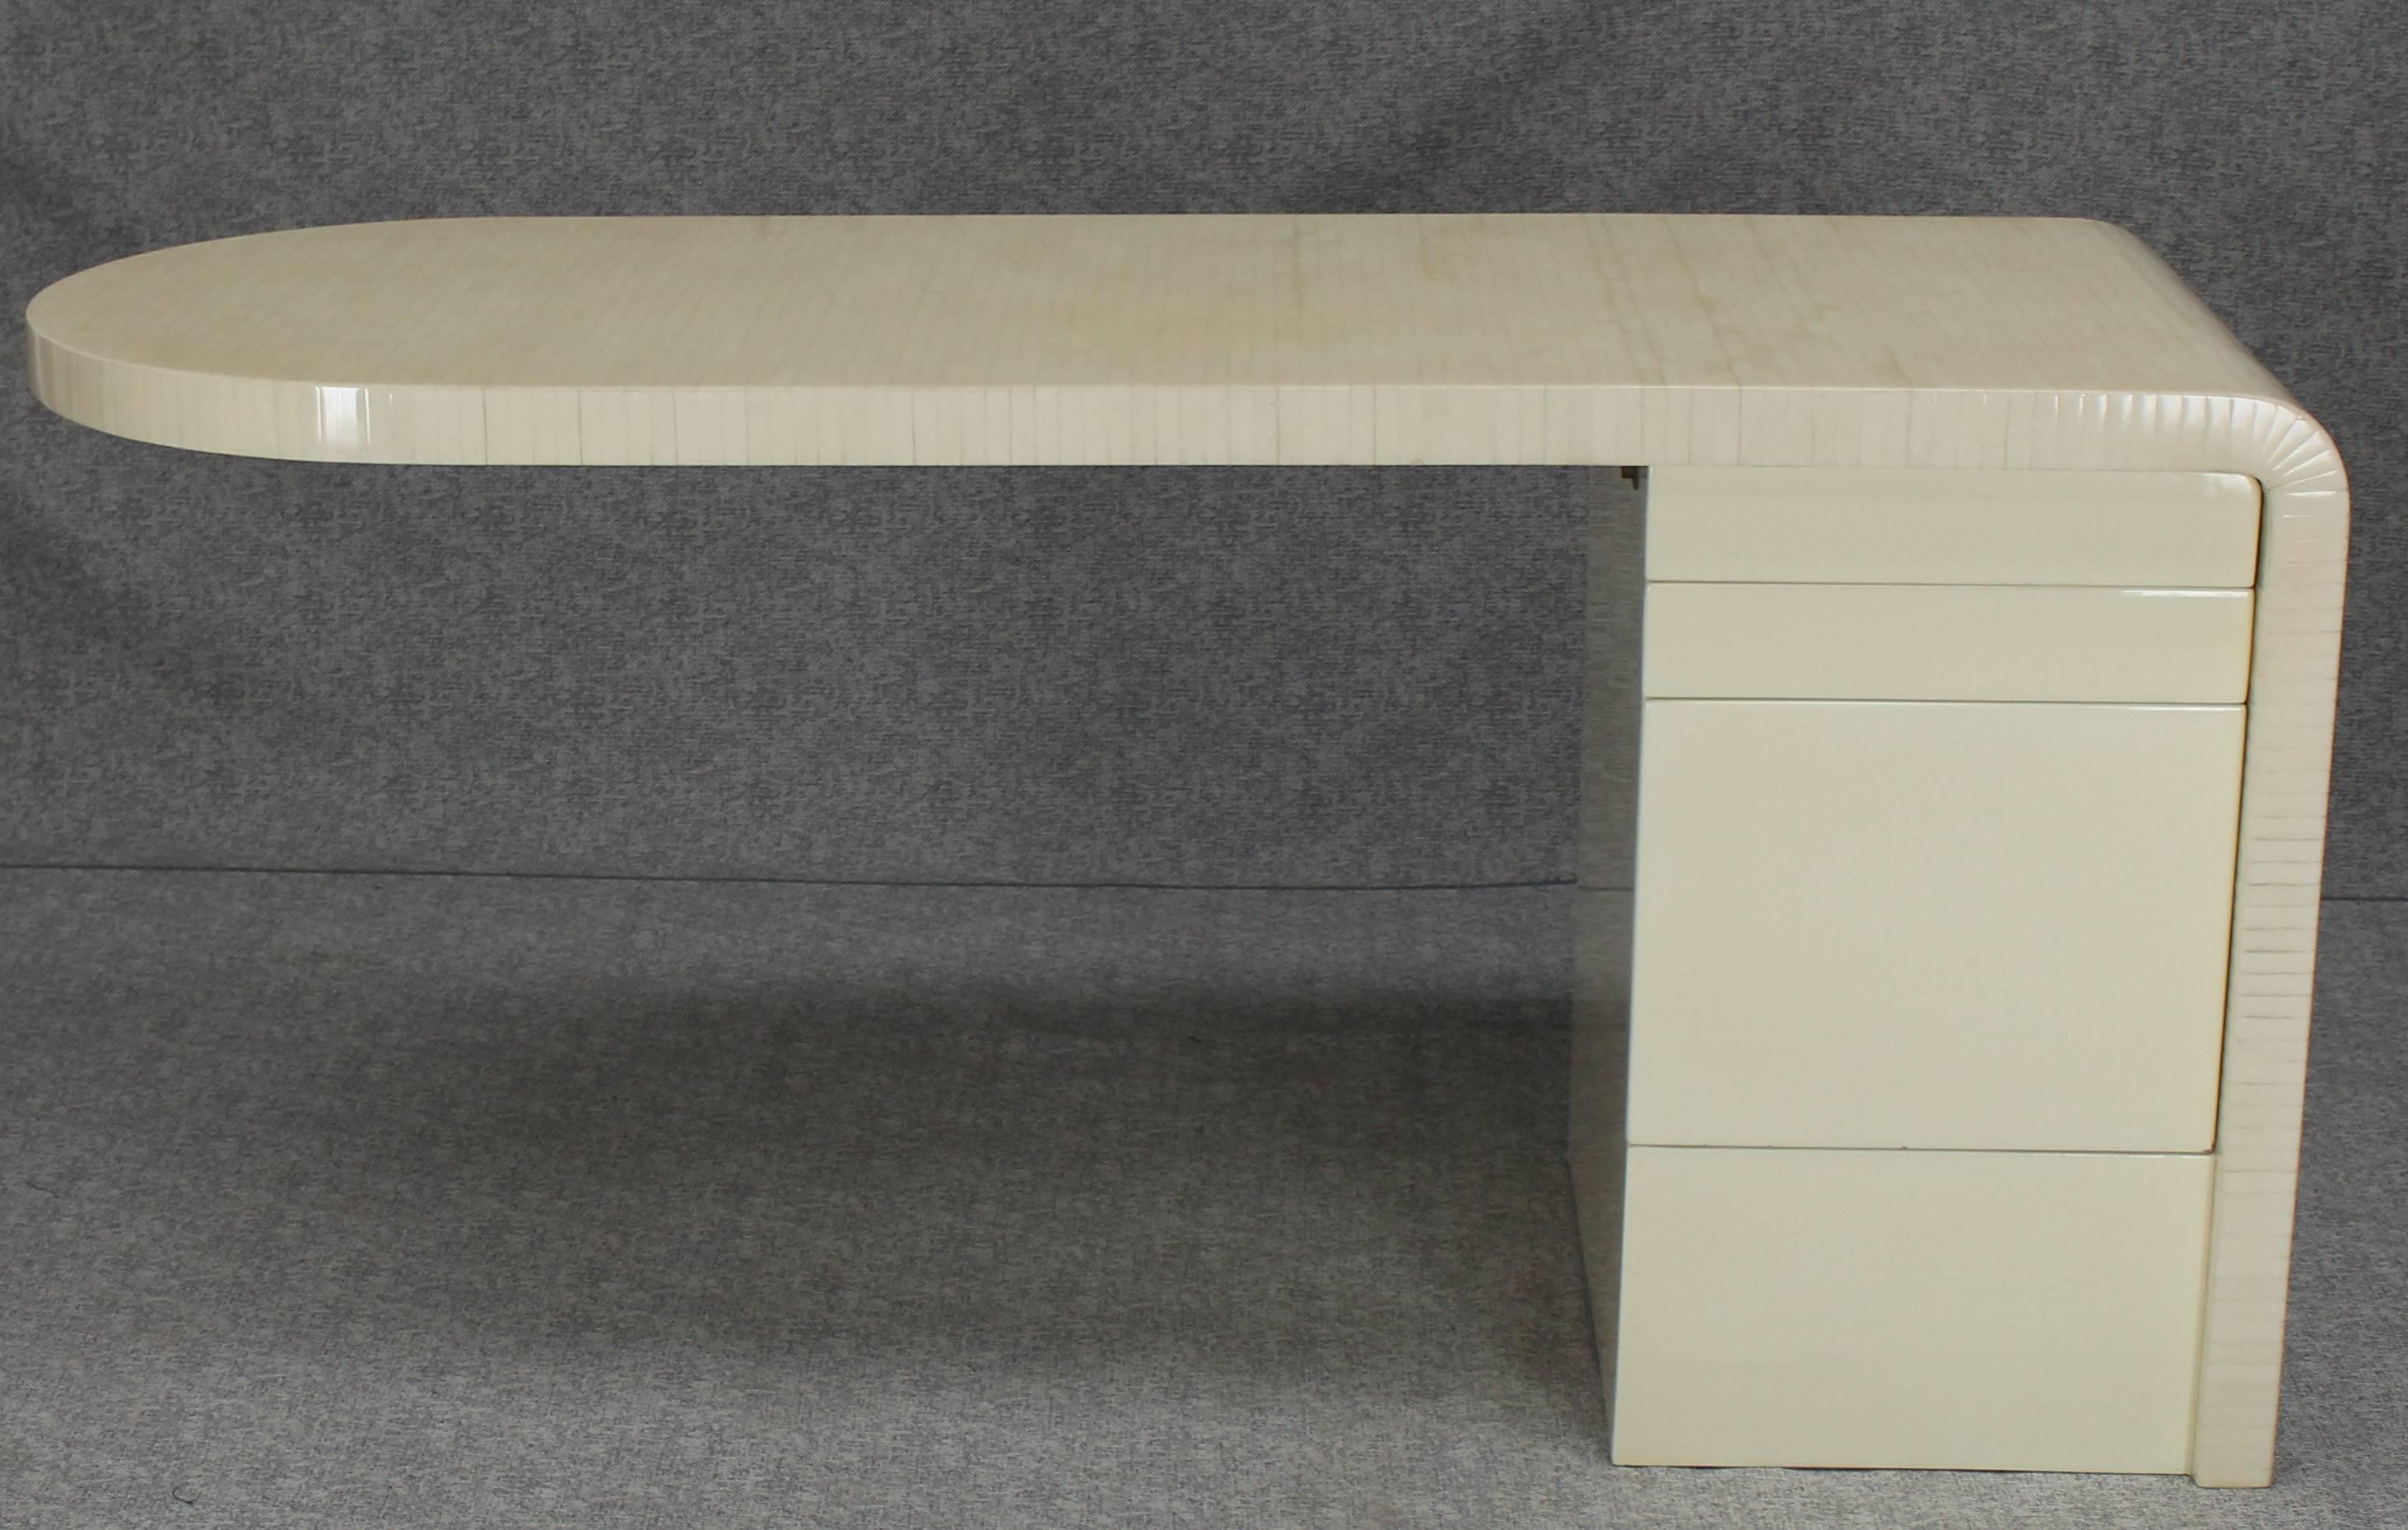 Cantilever Lacquered White Tessellated Bone Tile File Drawer Desk Writing Table In Good Condition For Sale In Rockaway, NJ